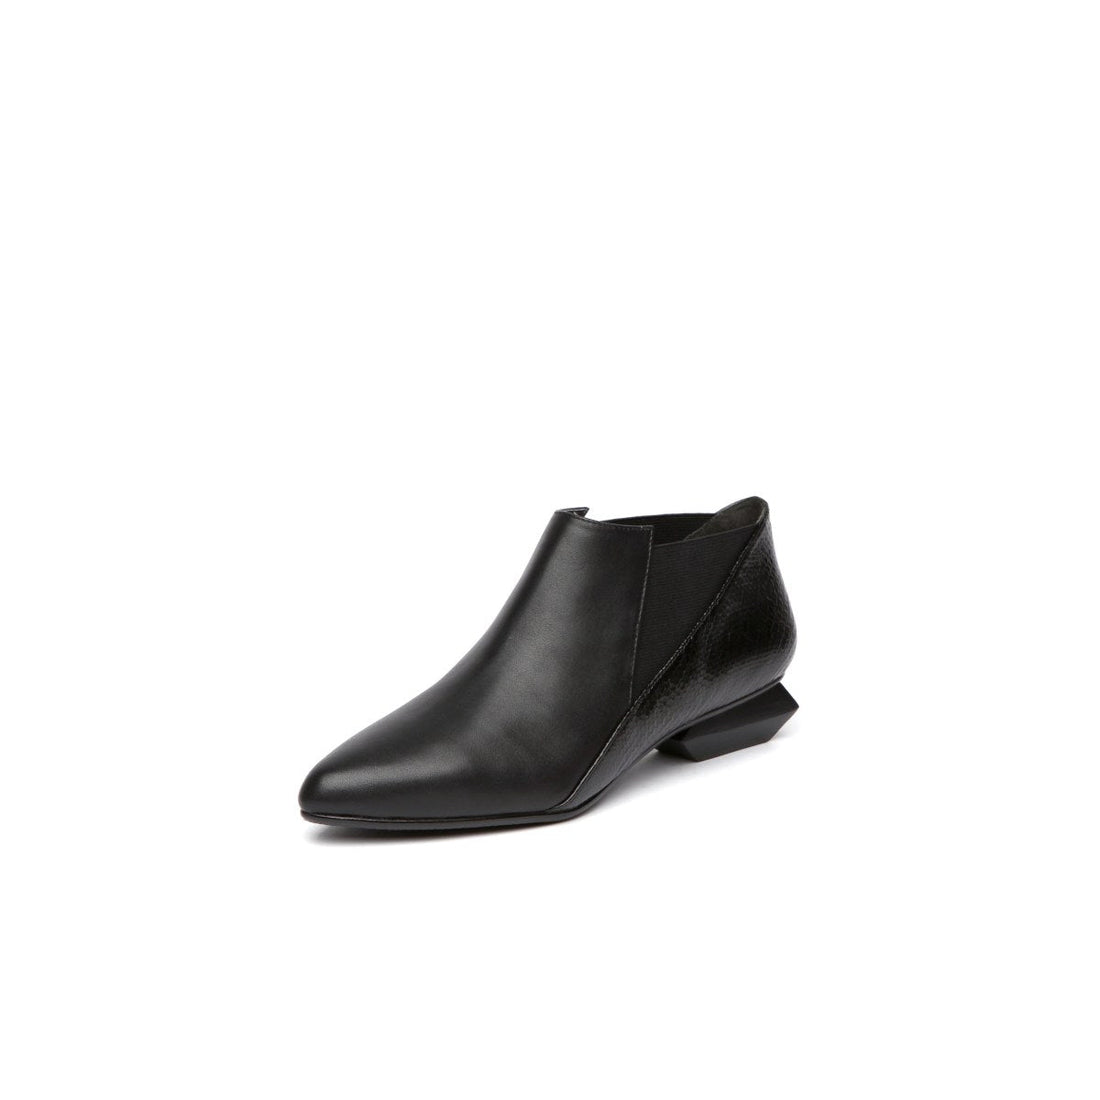 Tri-Style Trapezoidal Heel Leather Black Ankle Boots - 0cm